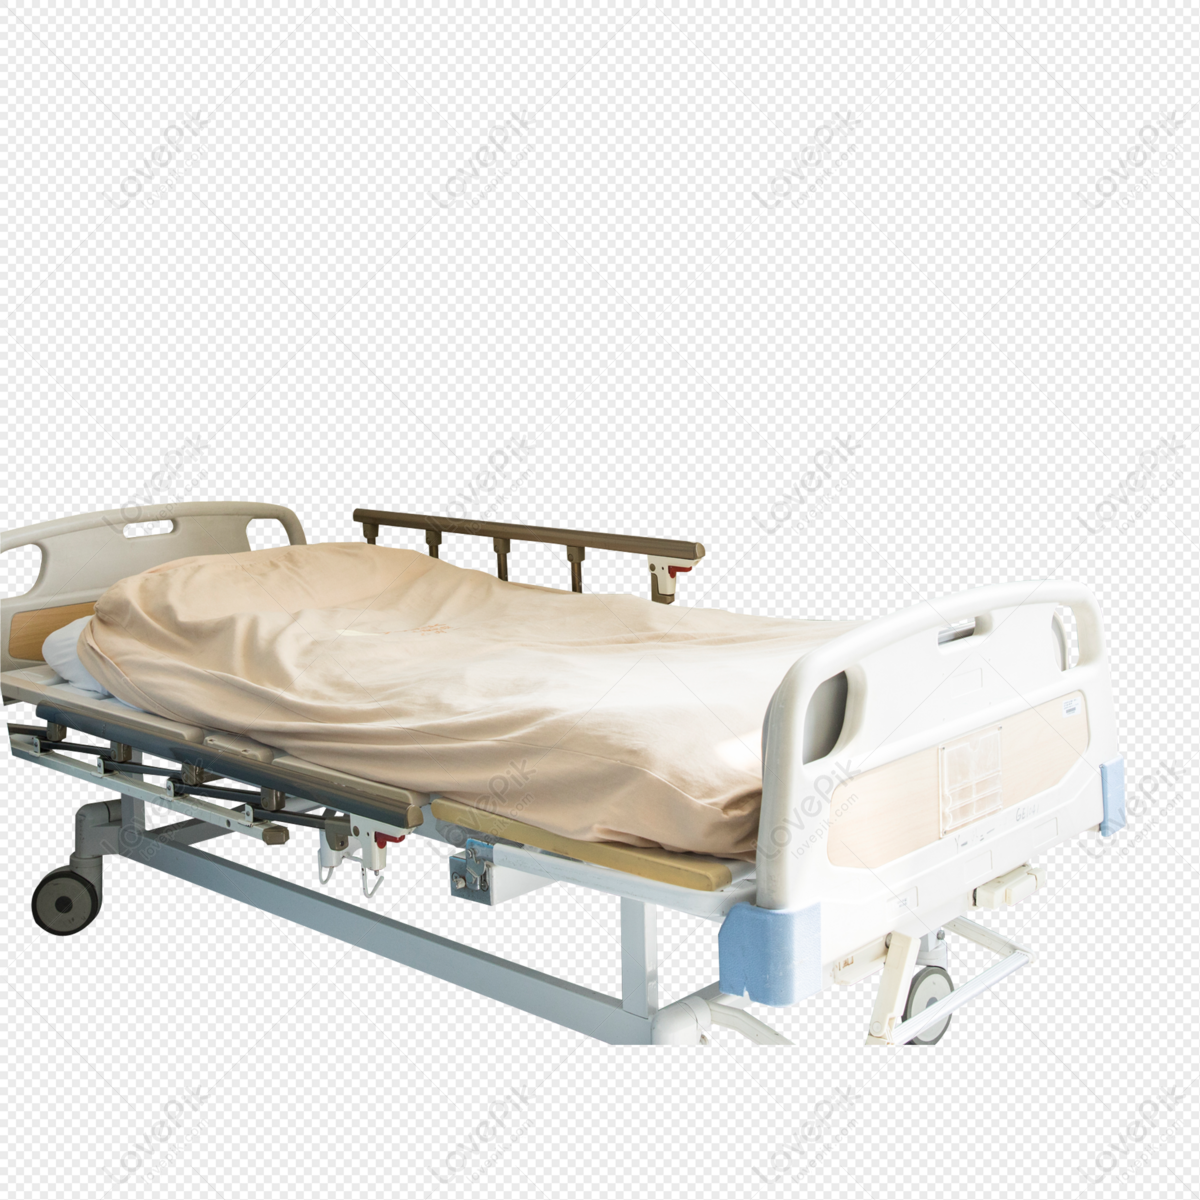 Hospital Beds Clipart